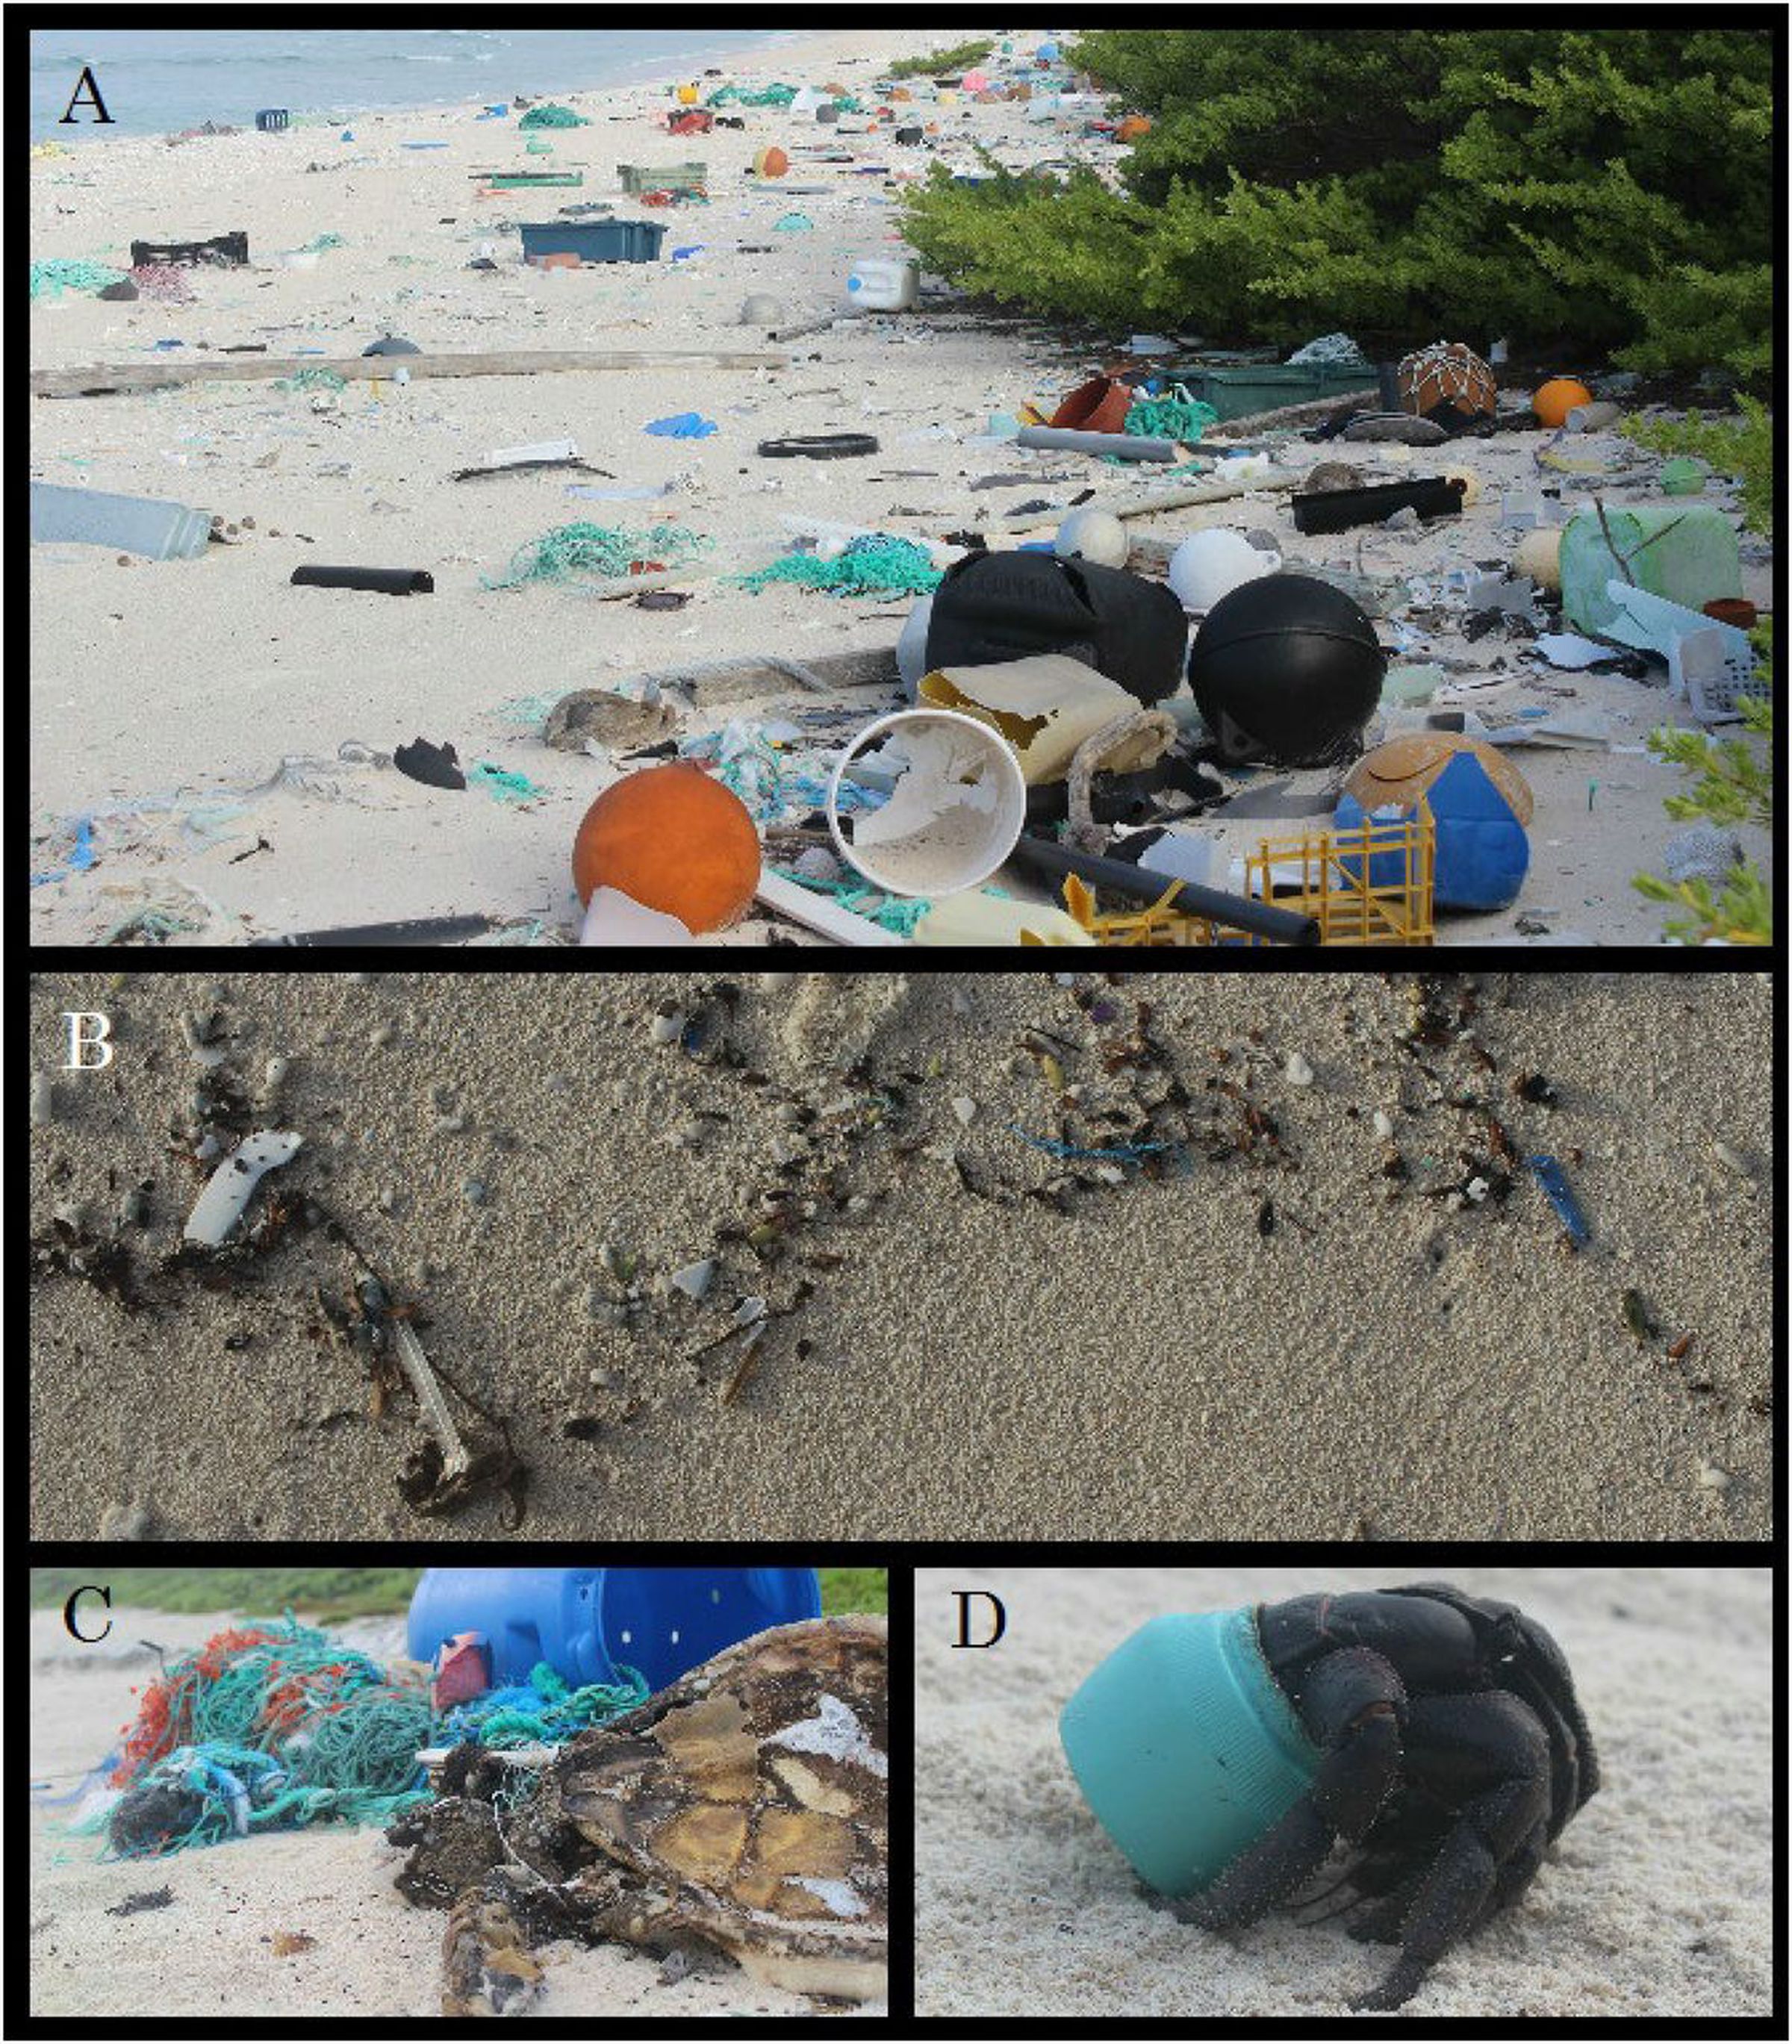 Examples of plastic trash on the island, including a purple hermit crab making its home in a plastic container